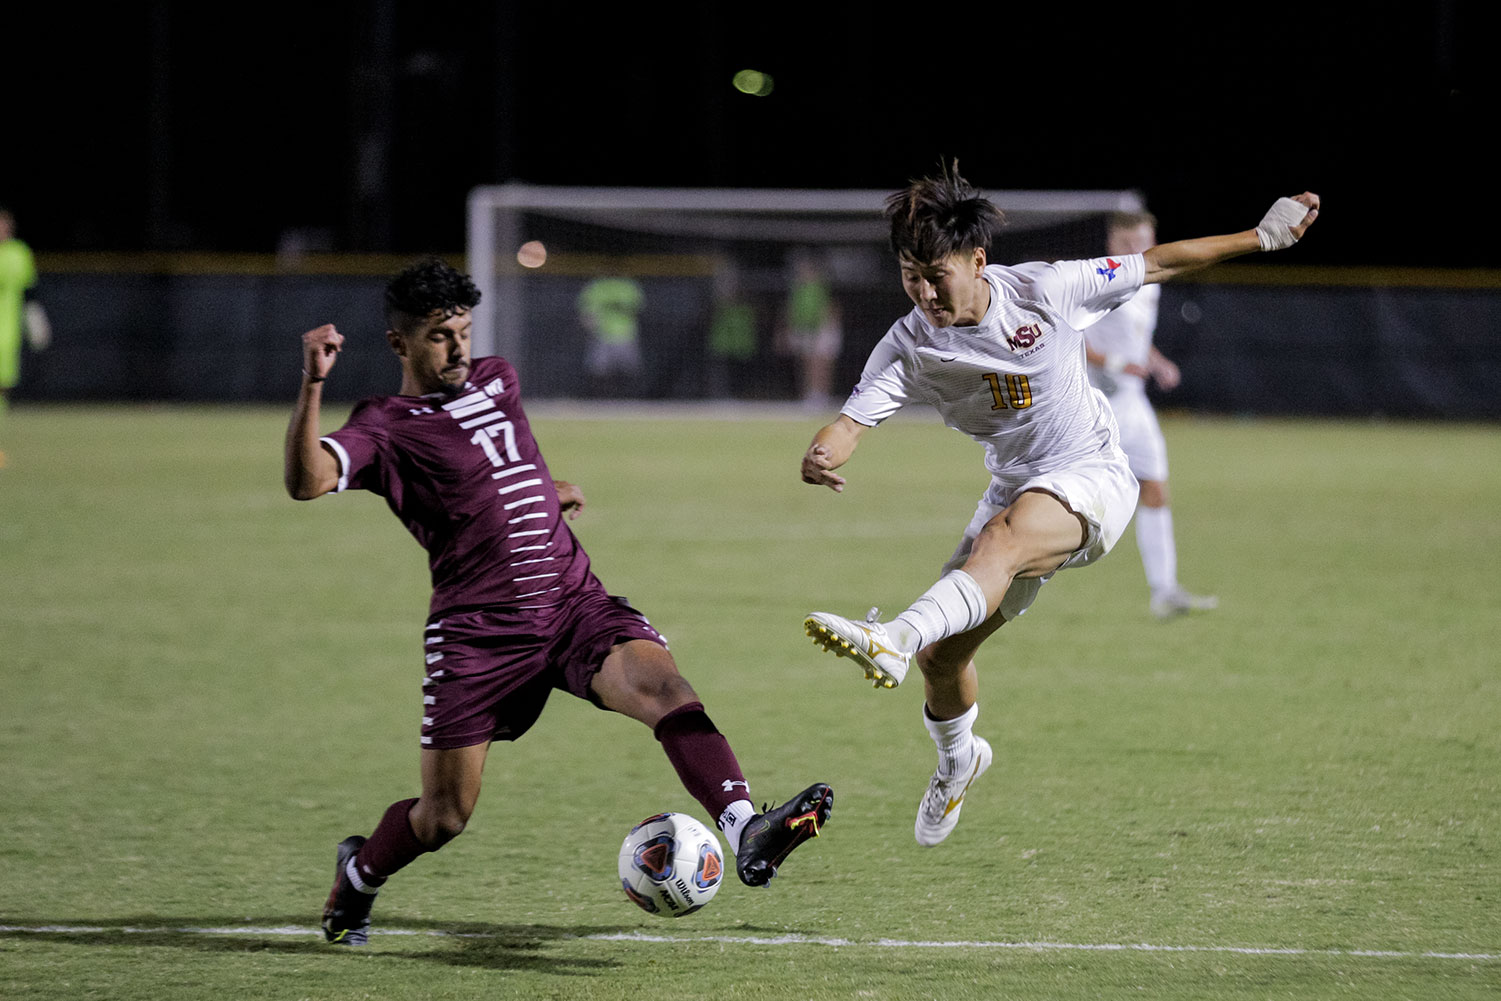 Sport and leisure studies senior and forward Toi Yamaoka leaps after he passes the ball to a teammate and sends it closer to West Texas A&M's goal